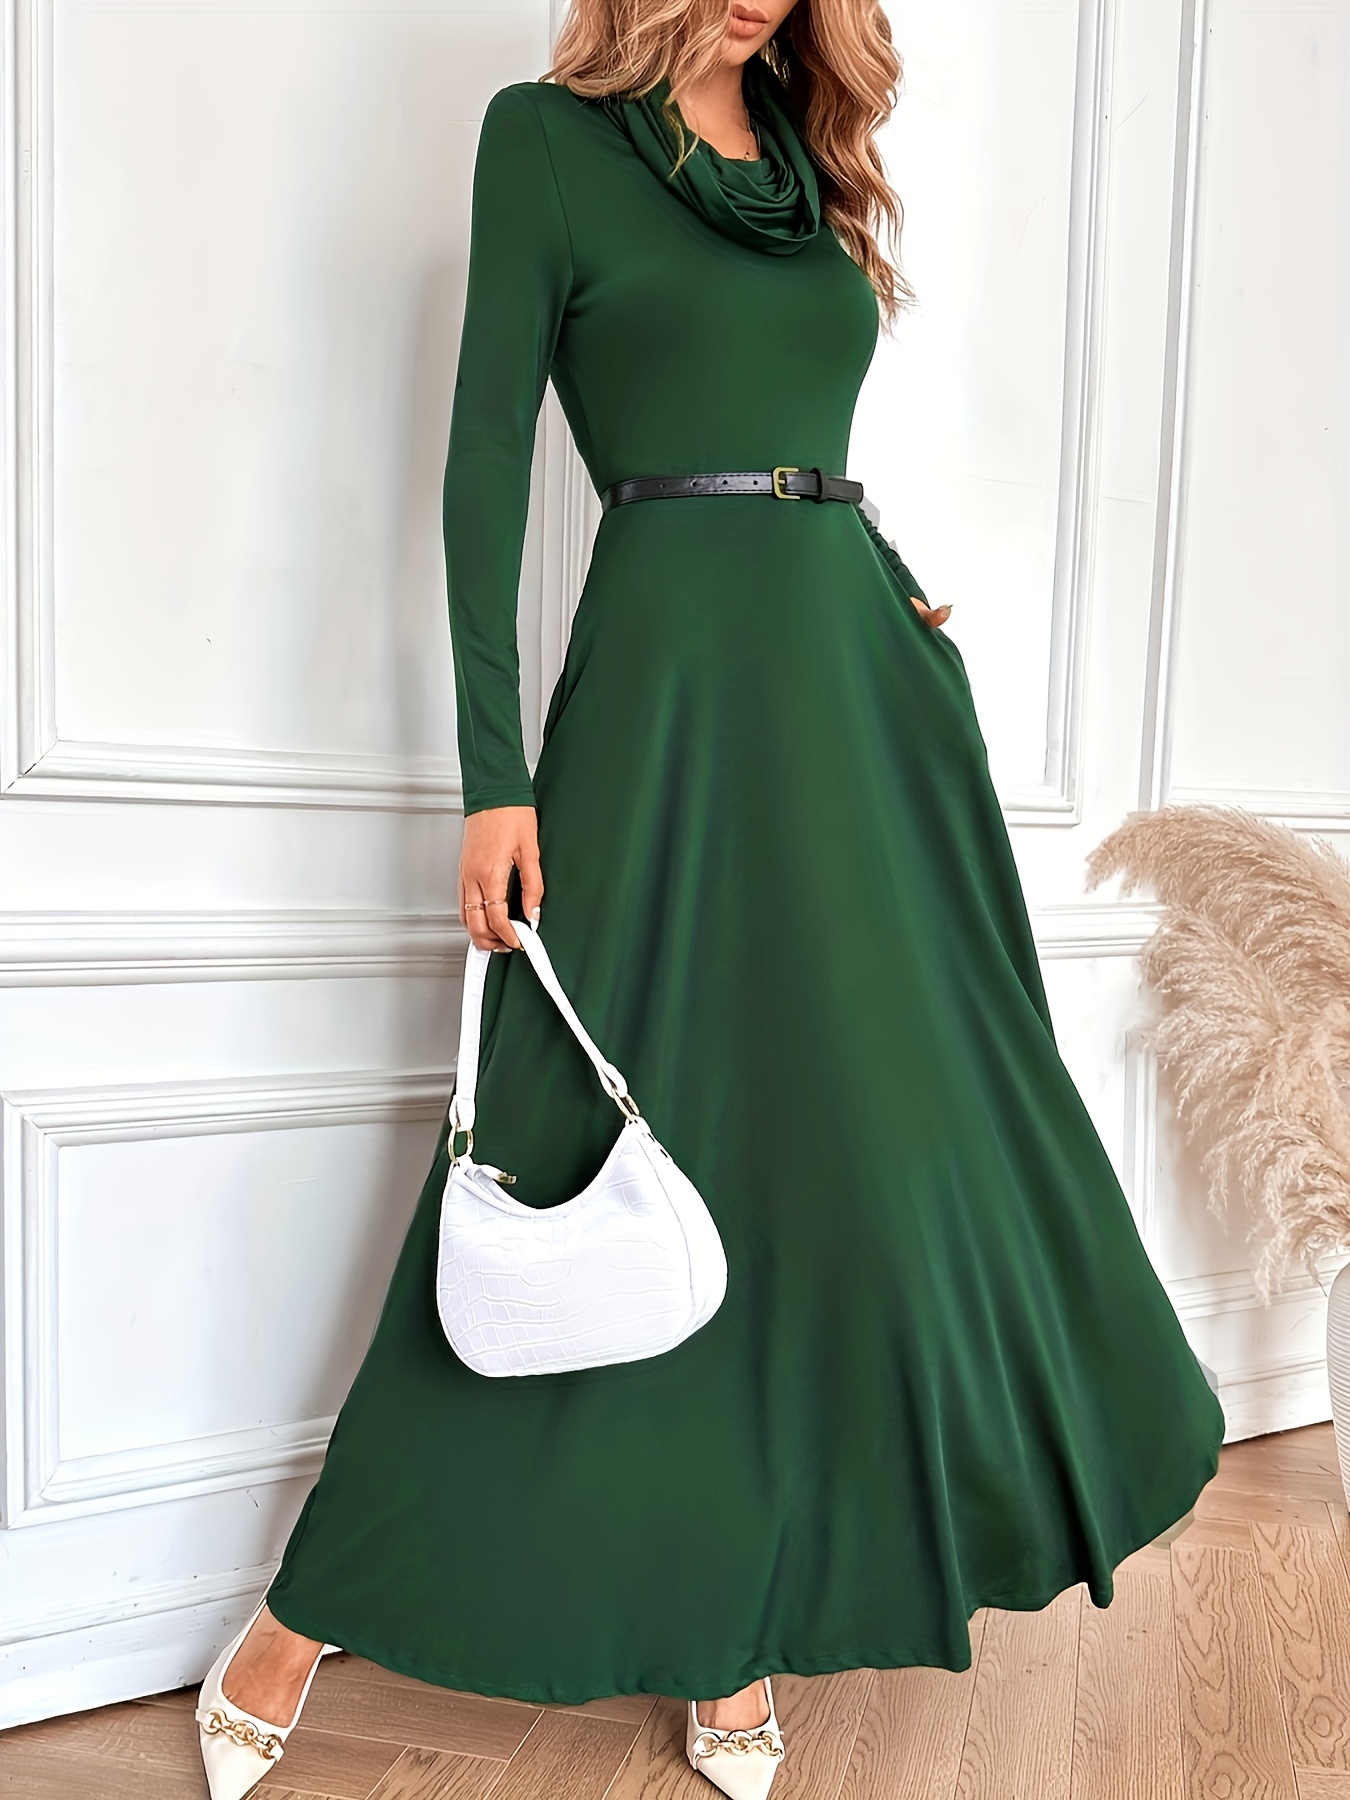 solid cowl neck dress elegant long sleeve party maxi dress womens clothing